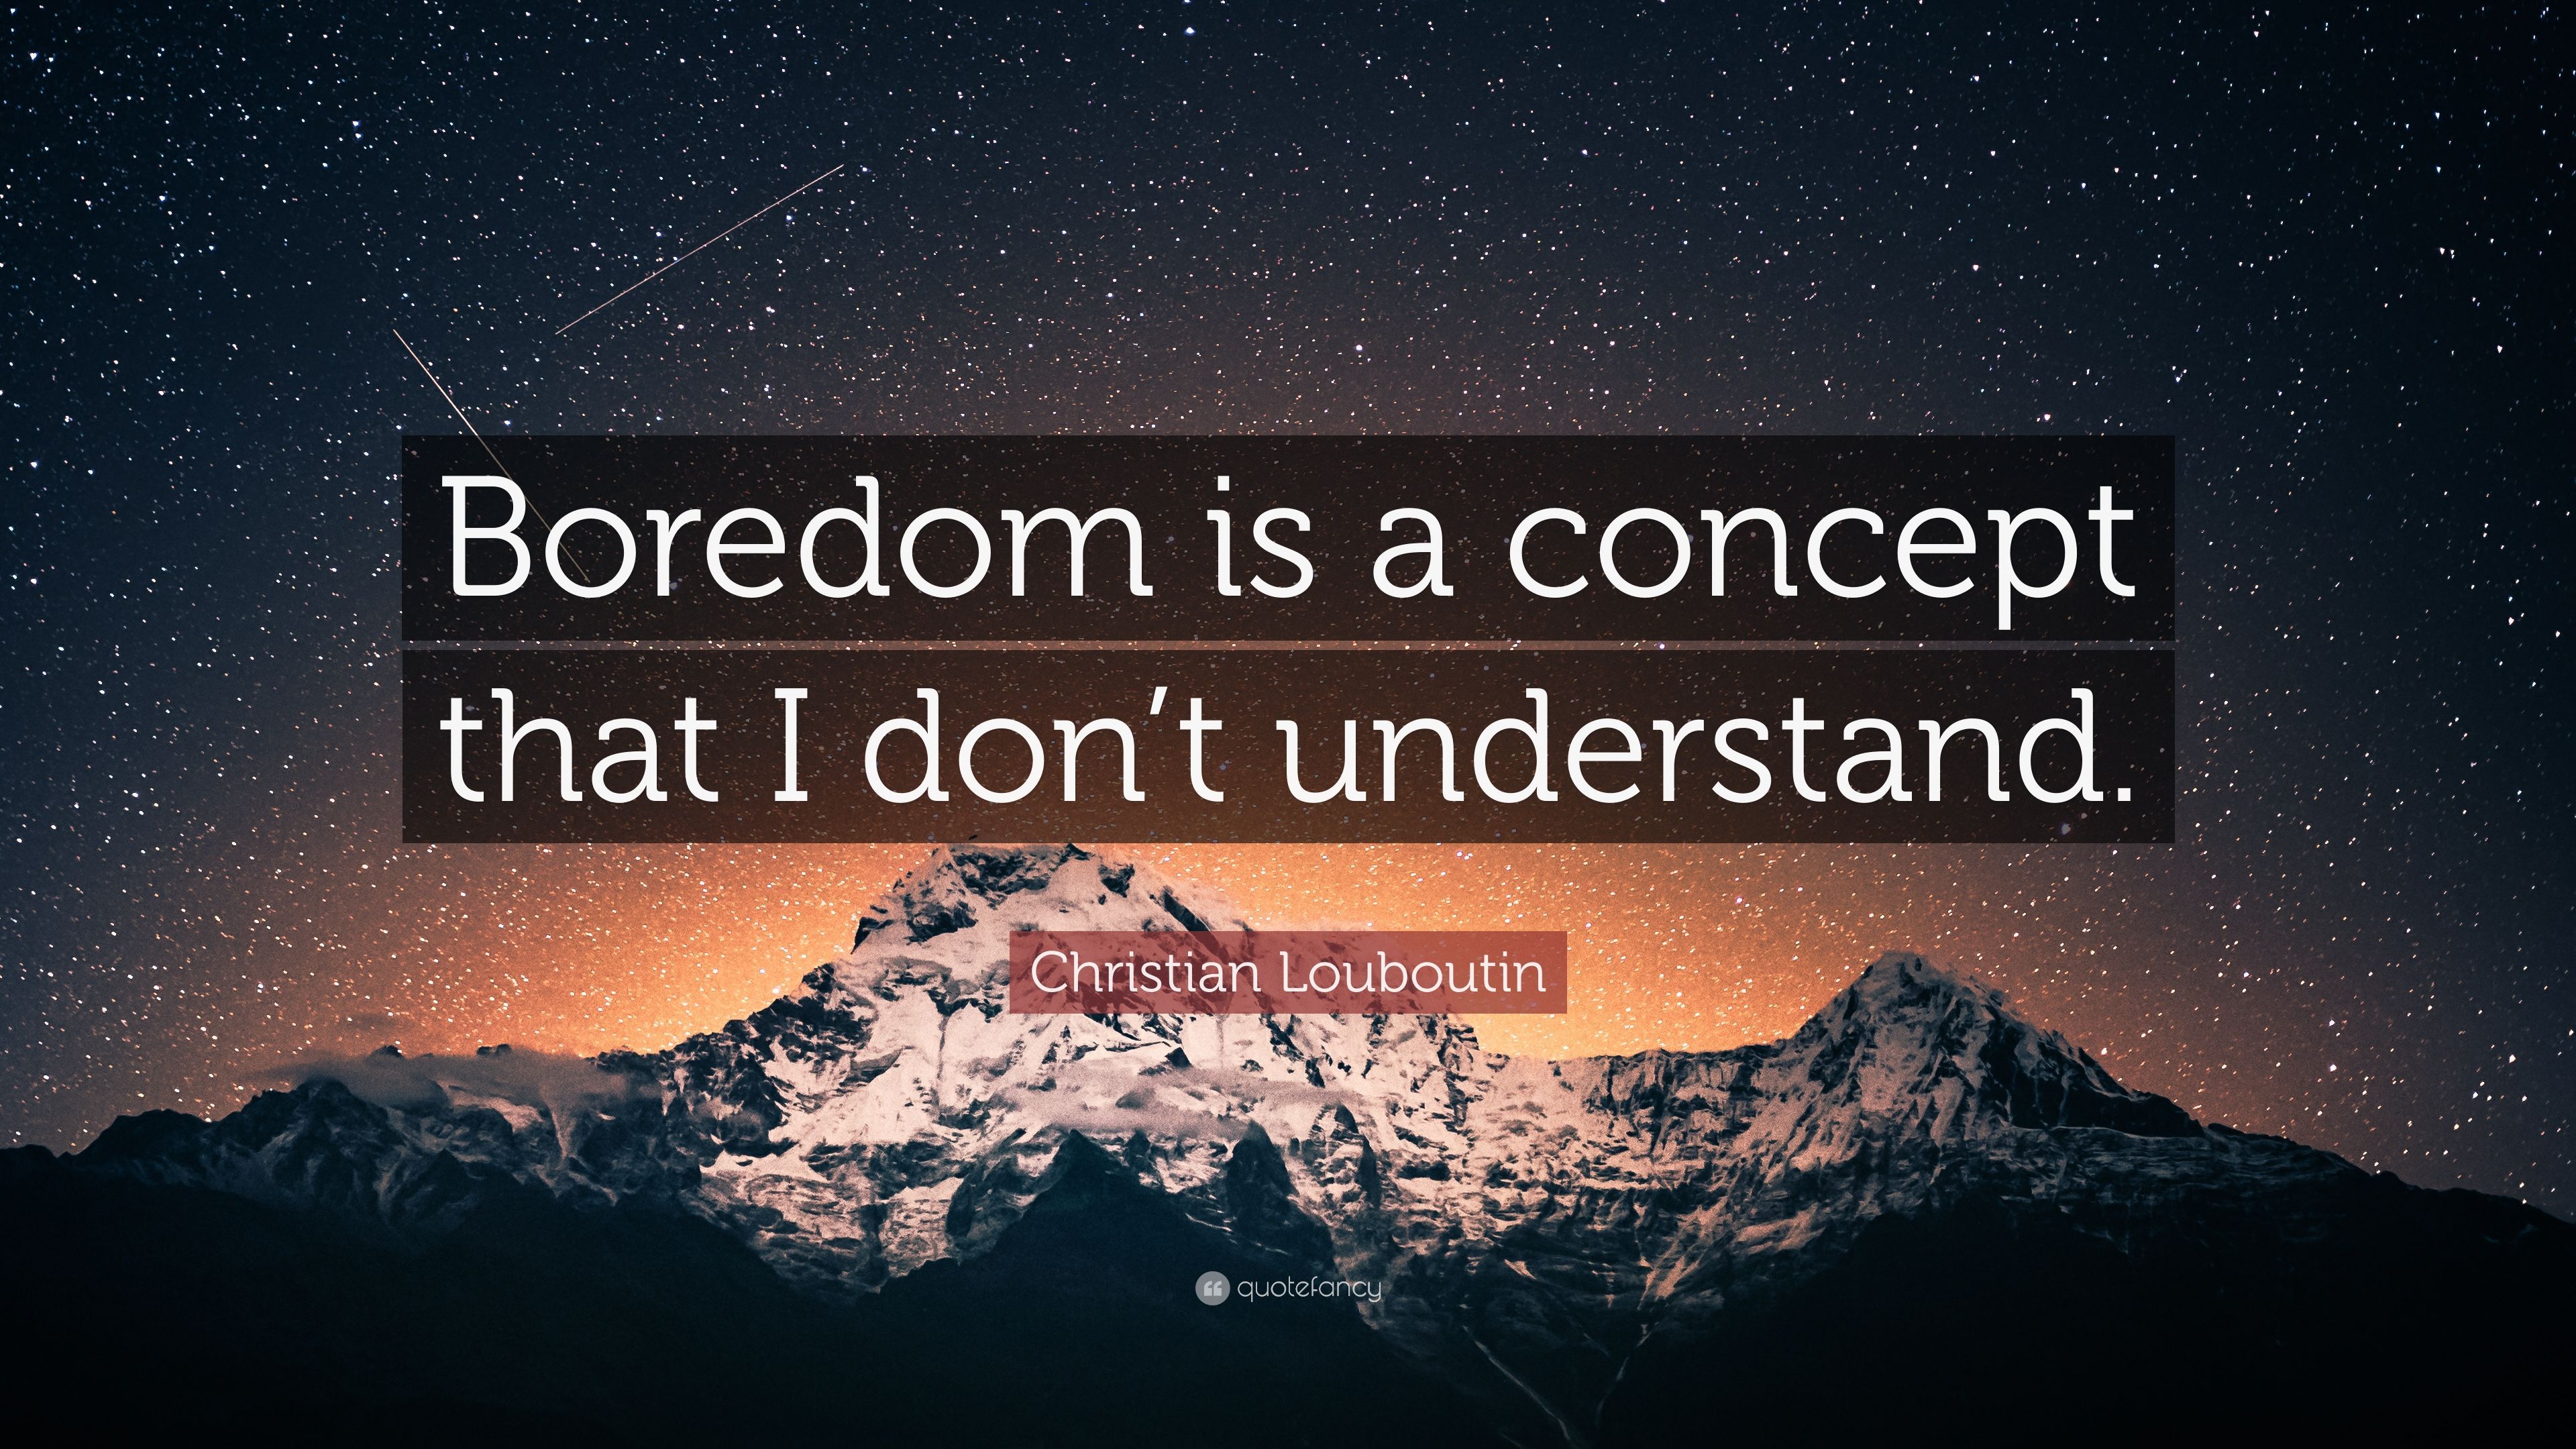 Christian Louboutin Quote: "Boredom is a concept that I don't und...